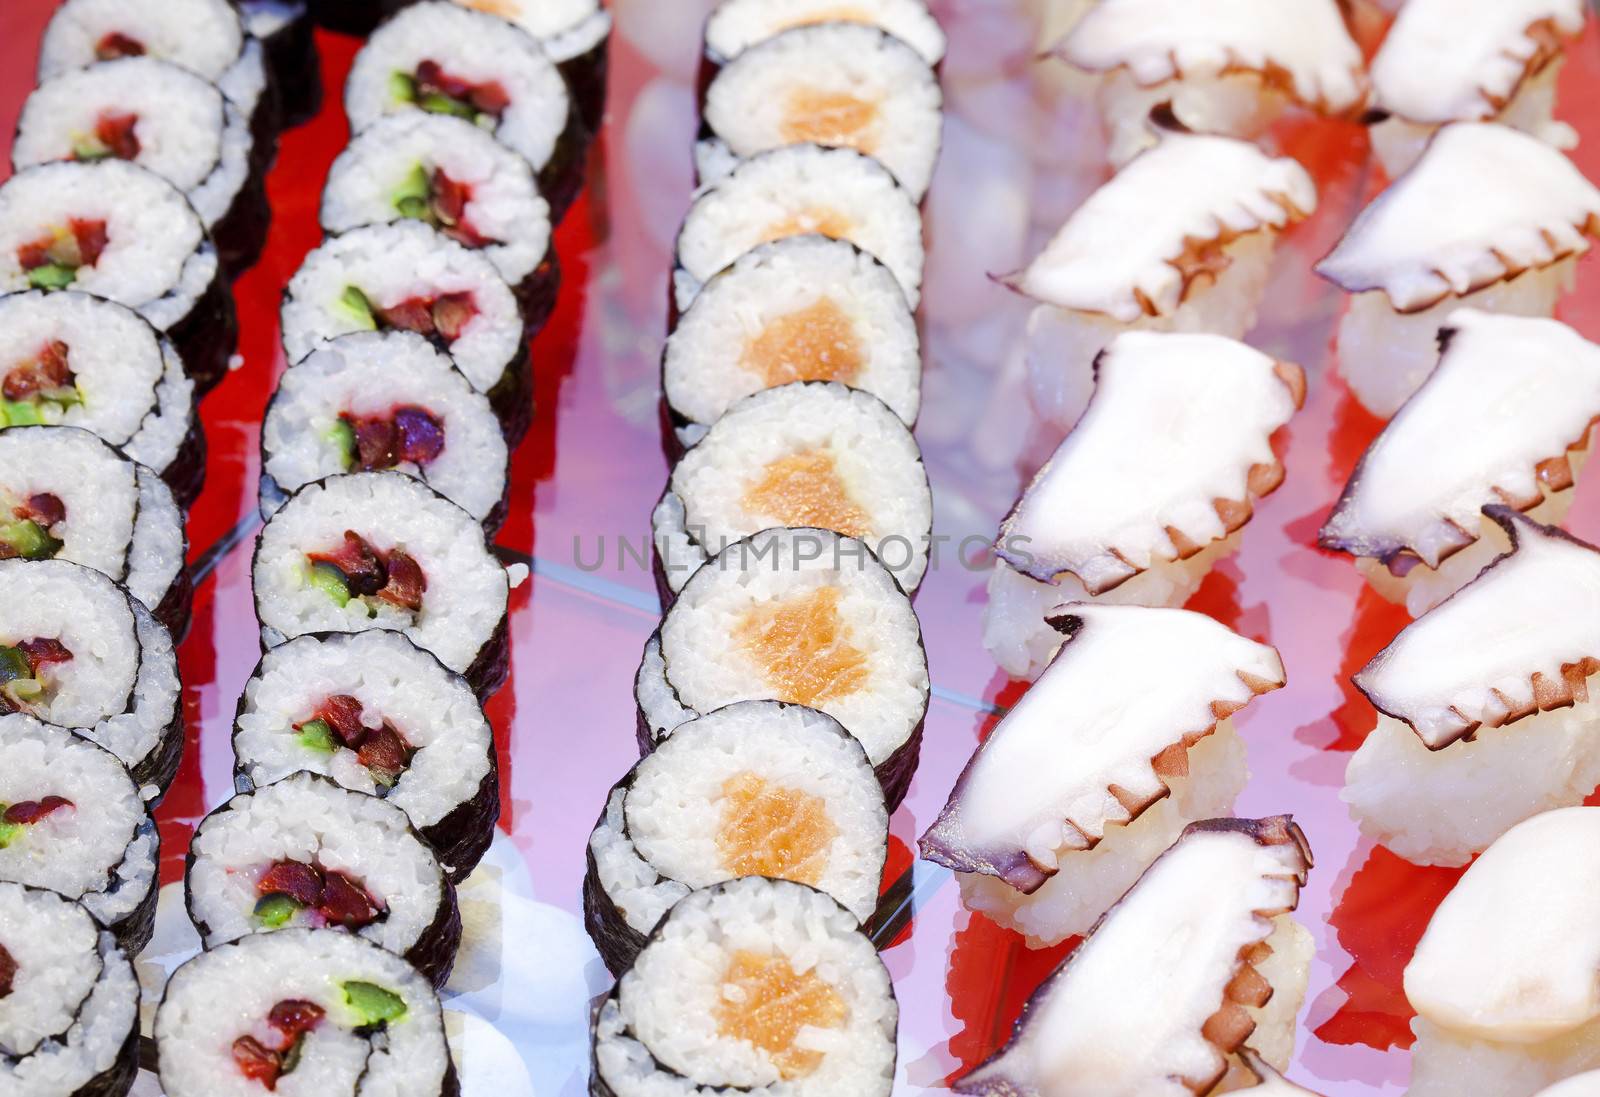 traditional japanese cuisine- sushi rolls served at a party